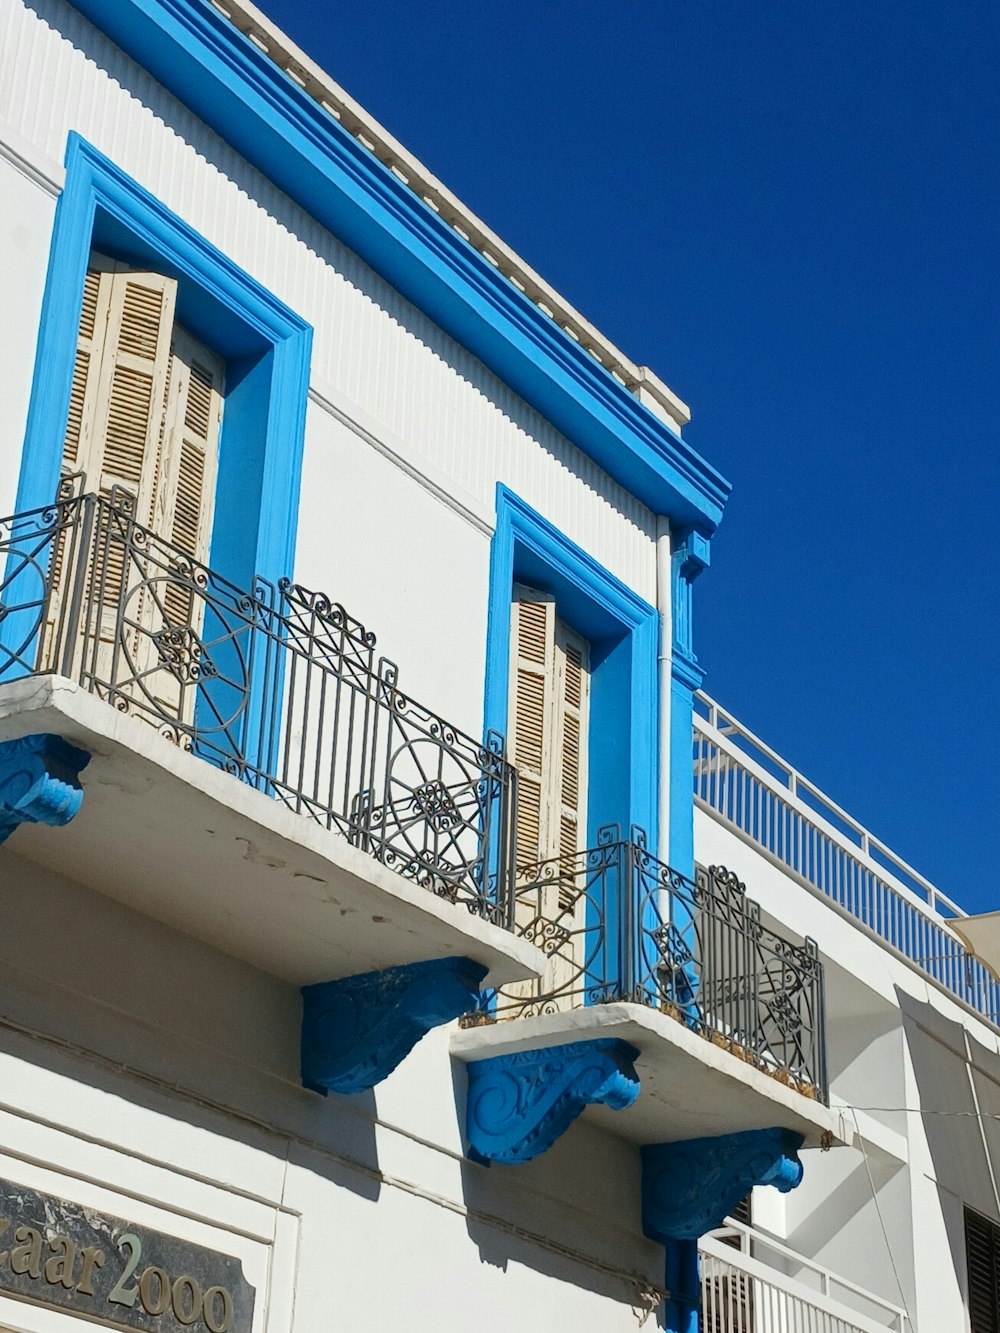 a blue and white building with balconies and shutters